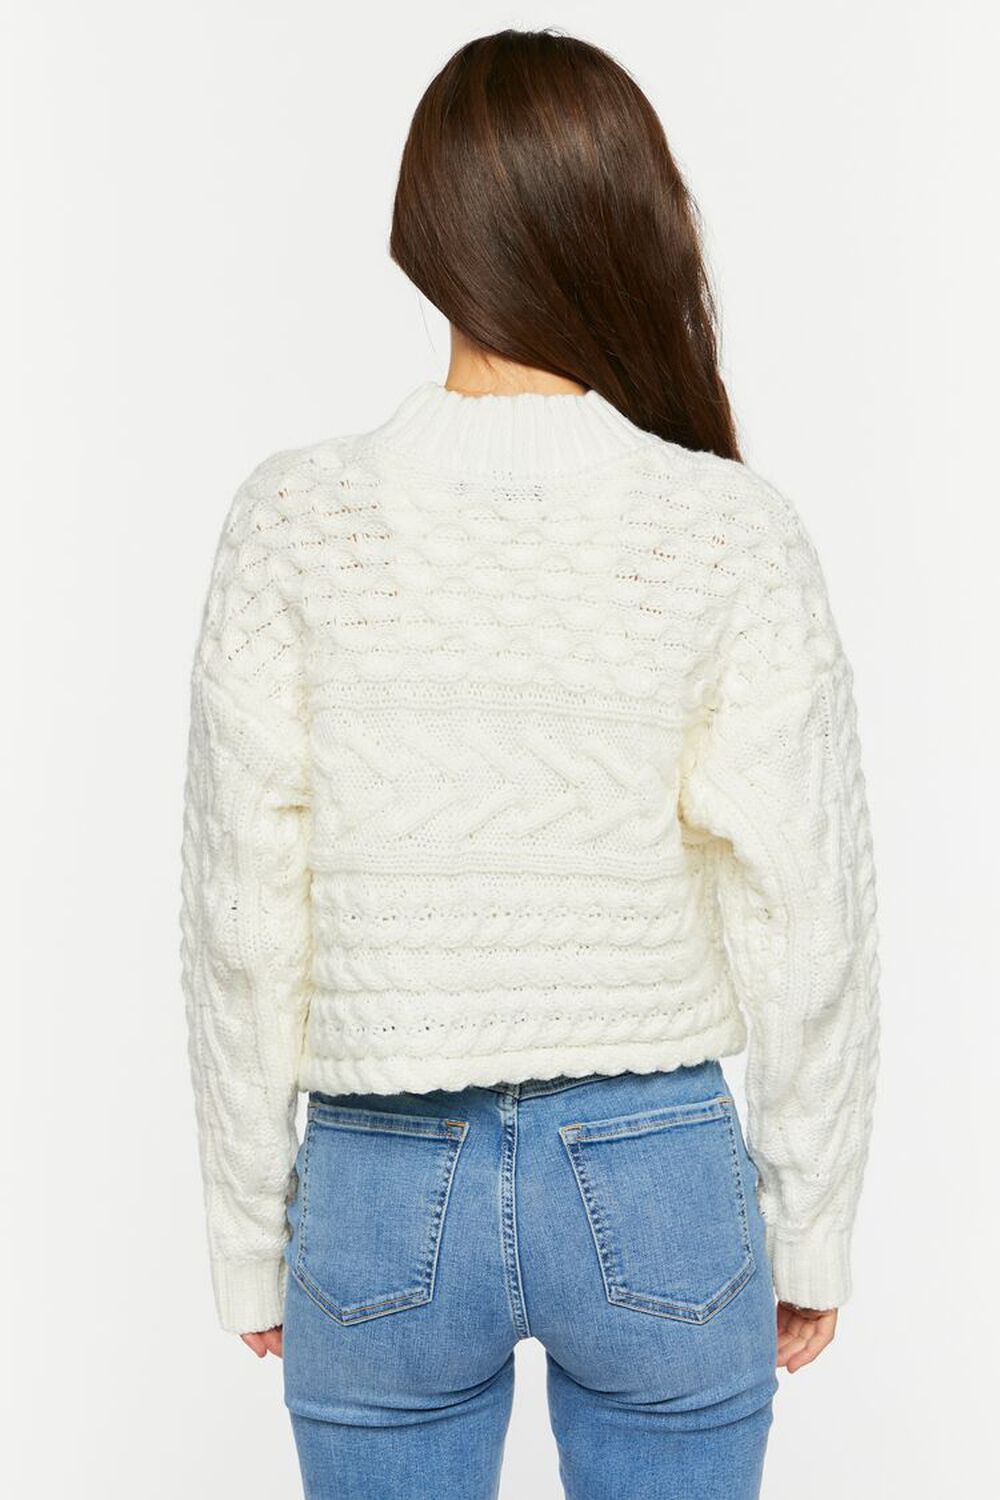 VANILLA Cable Knit Mock Neck Sweater, image 3